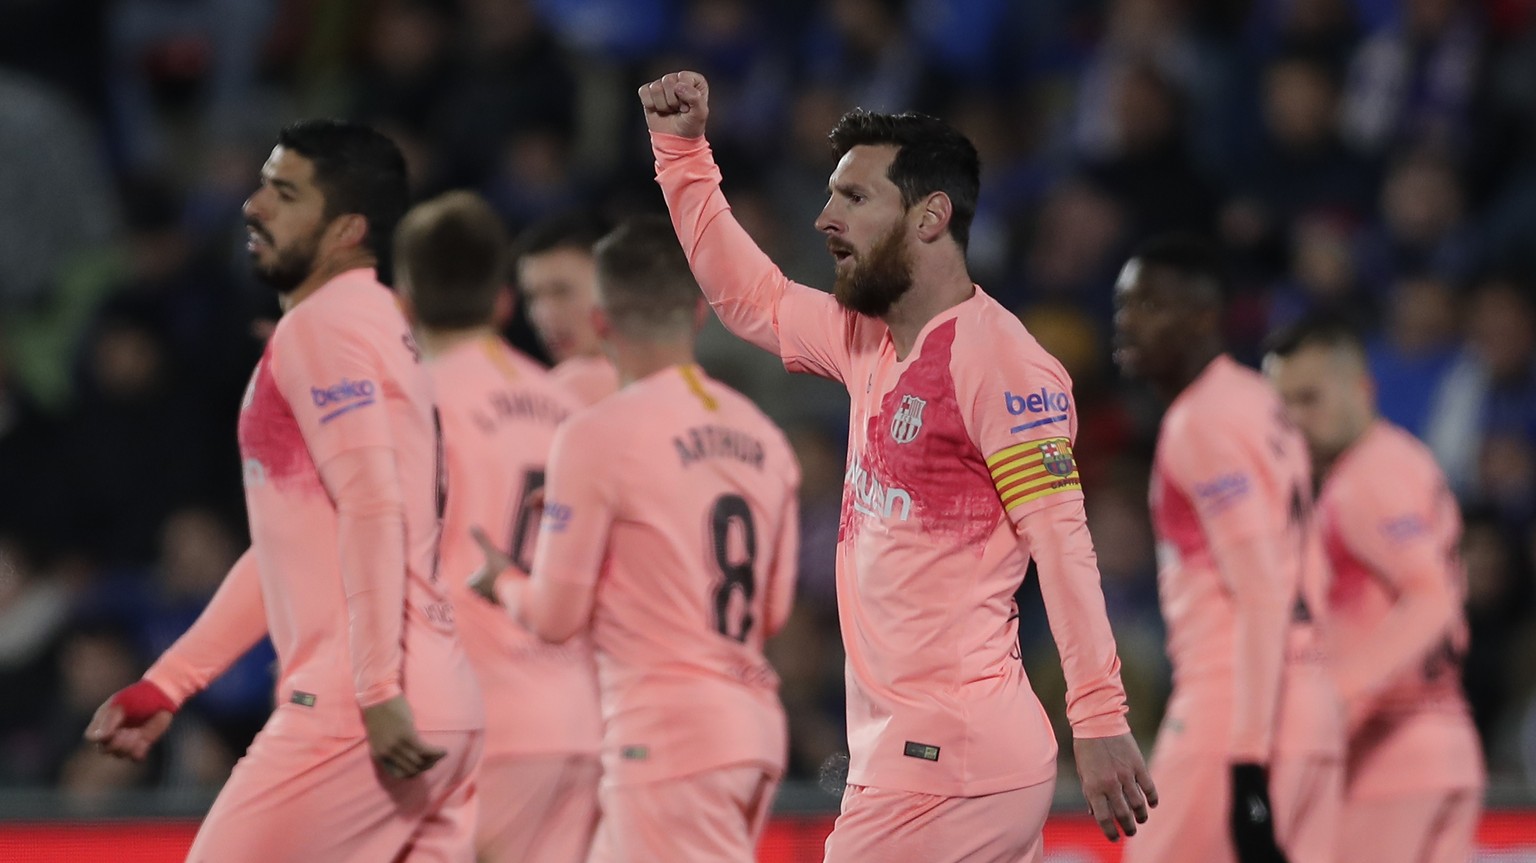 FC Barcelona&#039;s Lionel Messi celebrates after scoring during a Spanish La Liga soccer match between Getafe and FC Barcelona at the Alfonso Perez stadium in Getafe, Spain, Sunday, Jan. 6, 2019. (AP ...